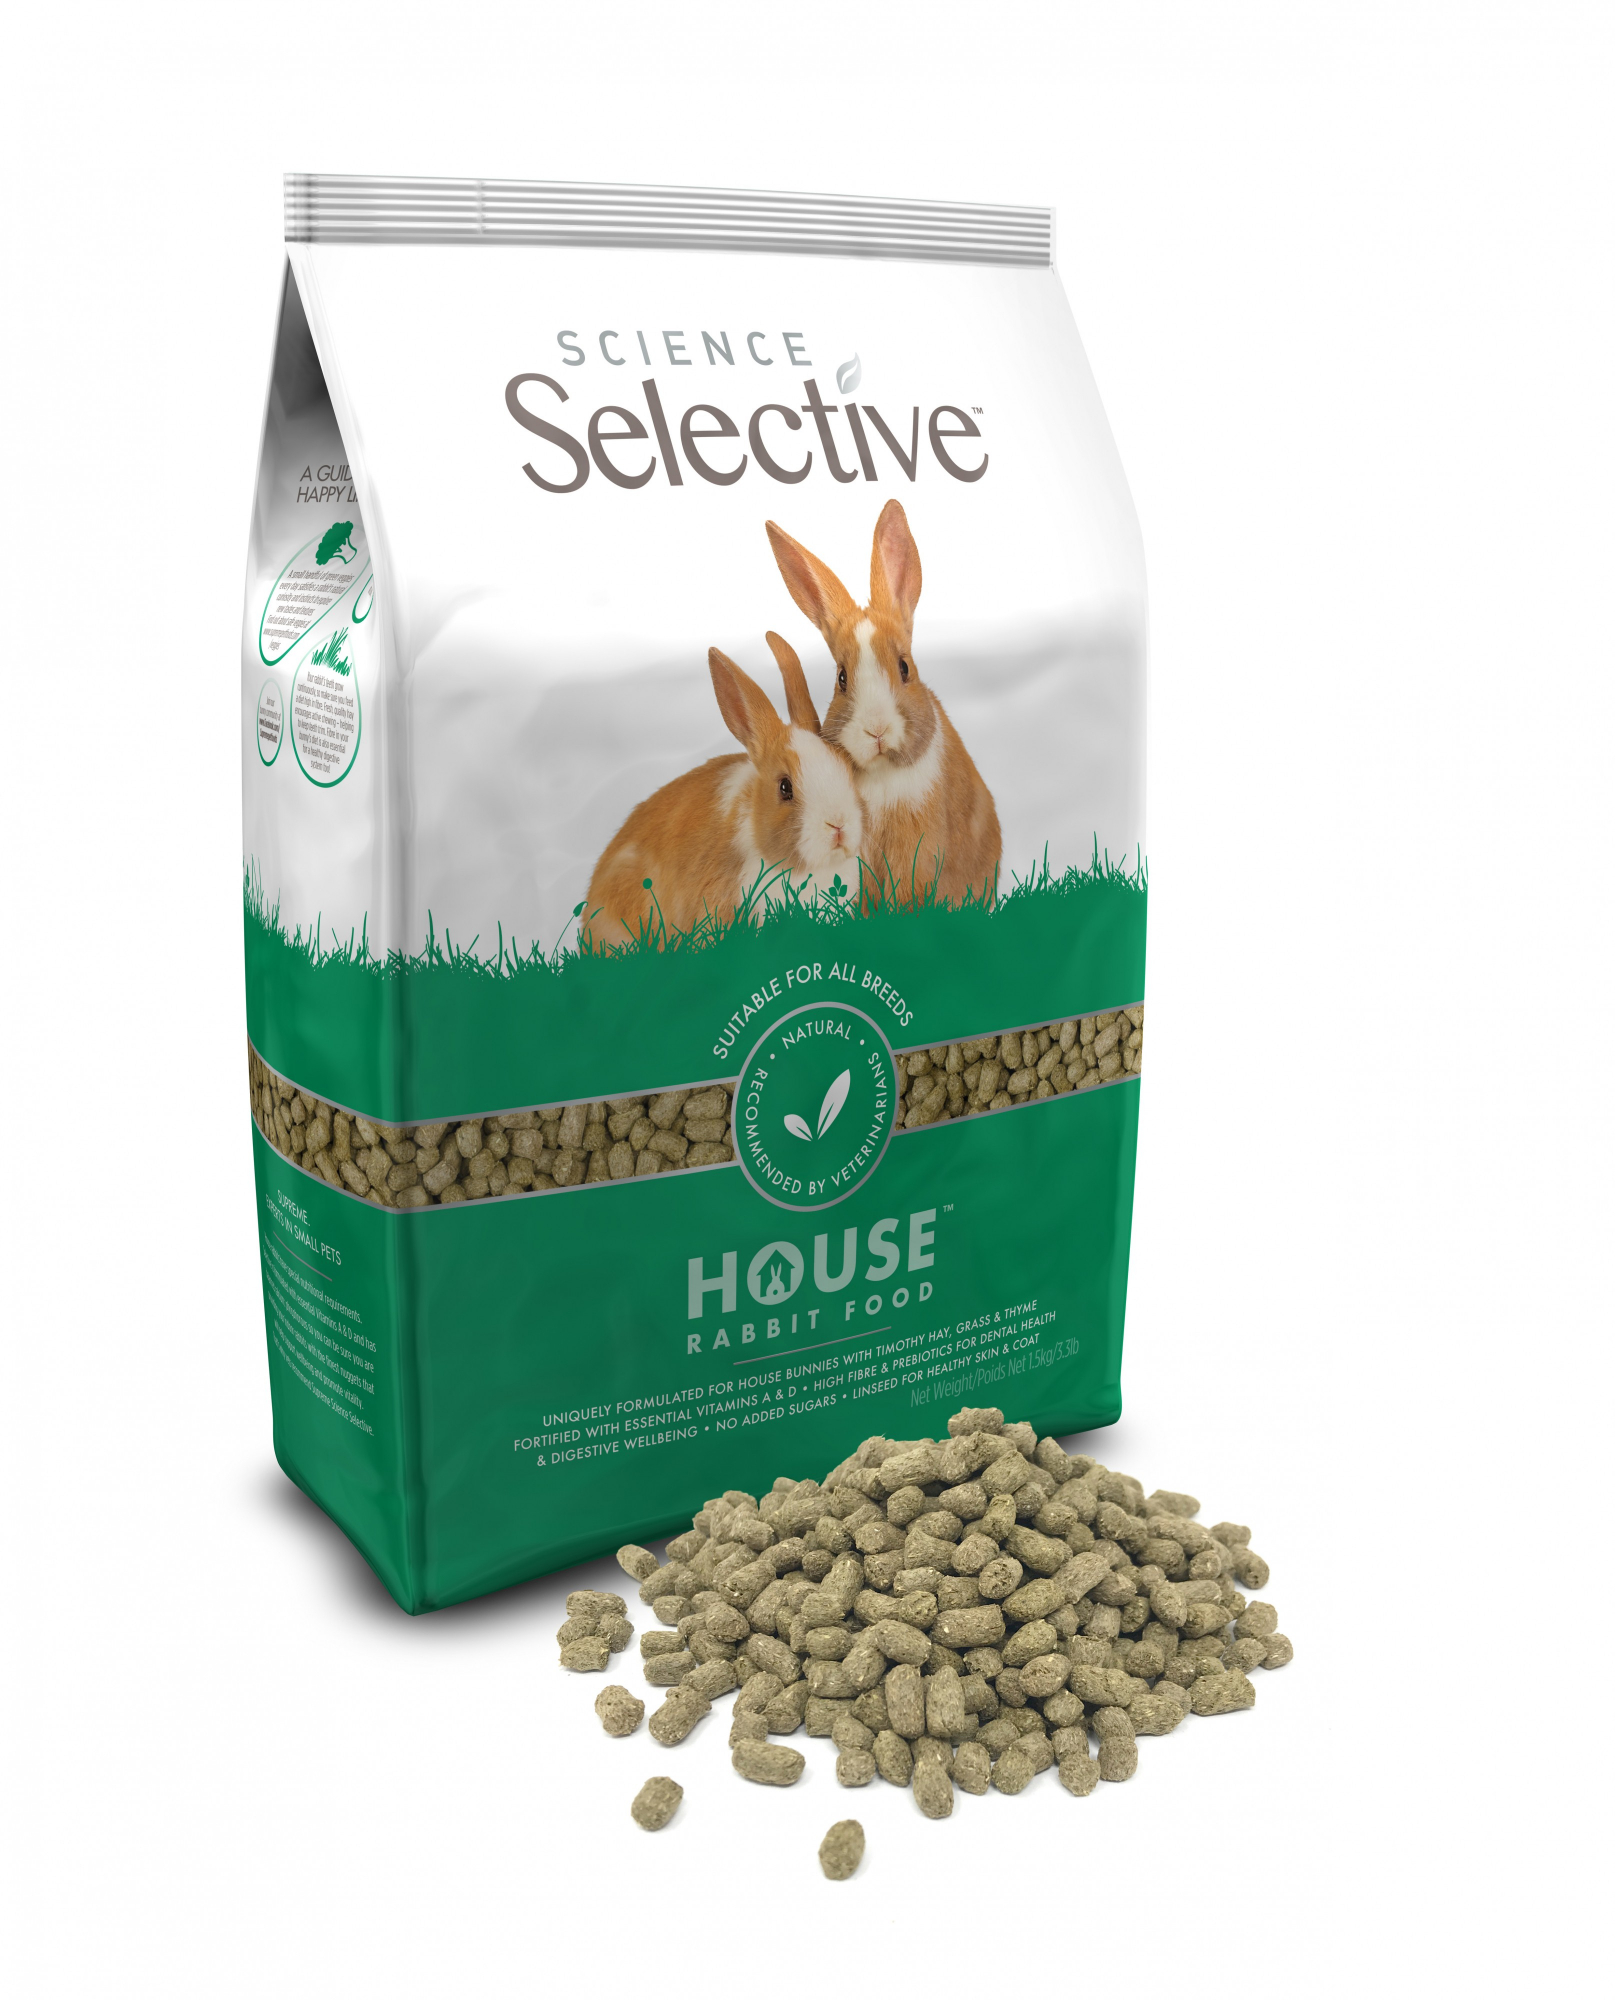 Science Selective House Rabbit food